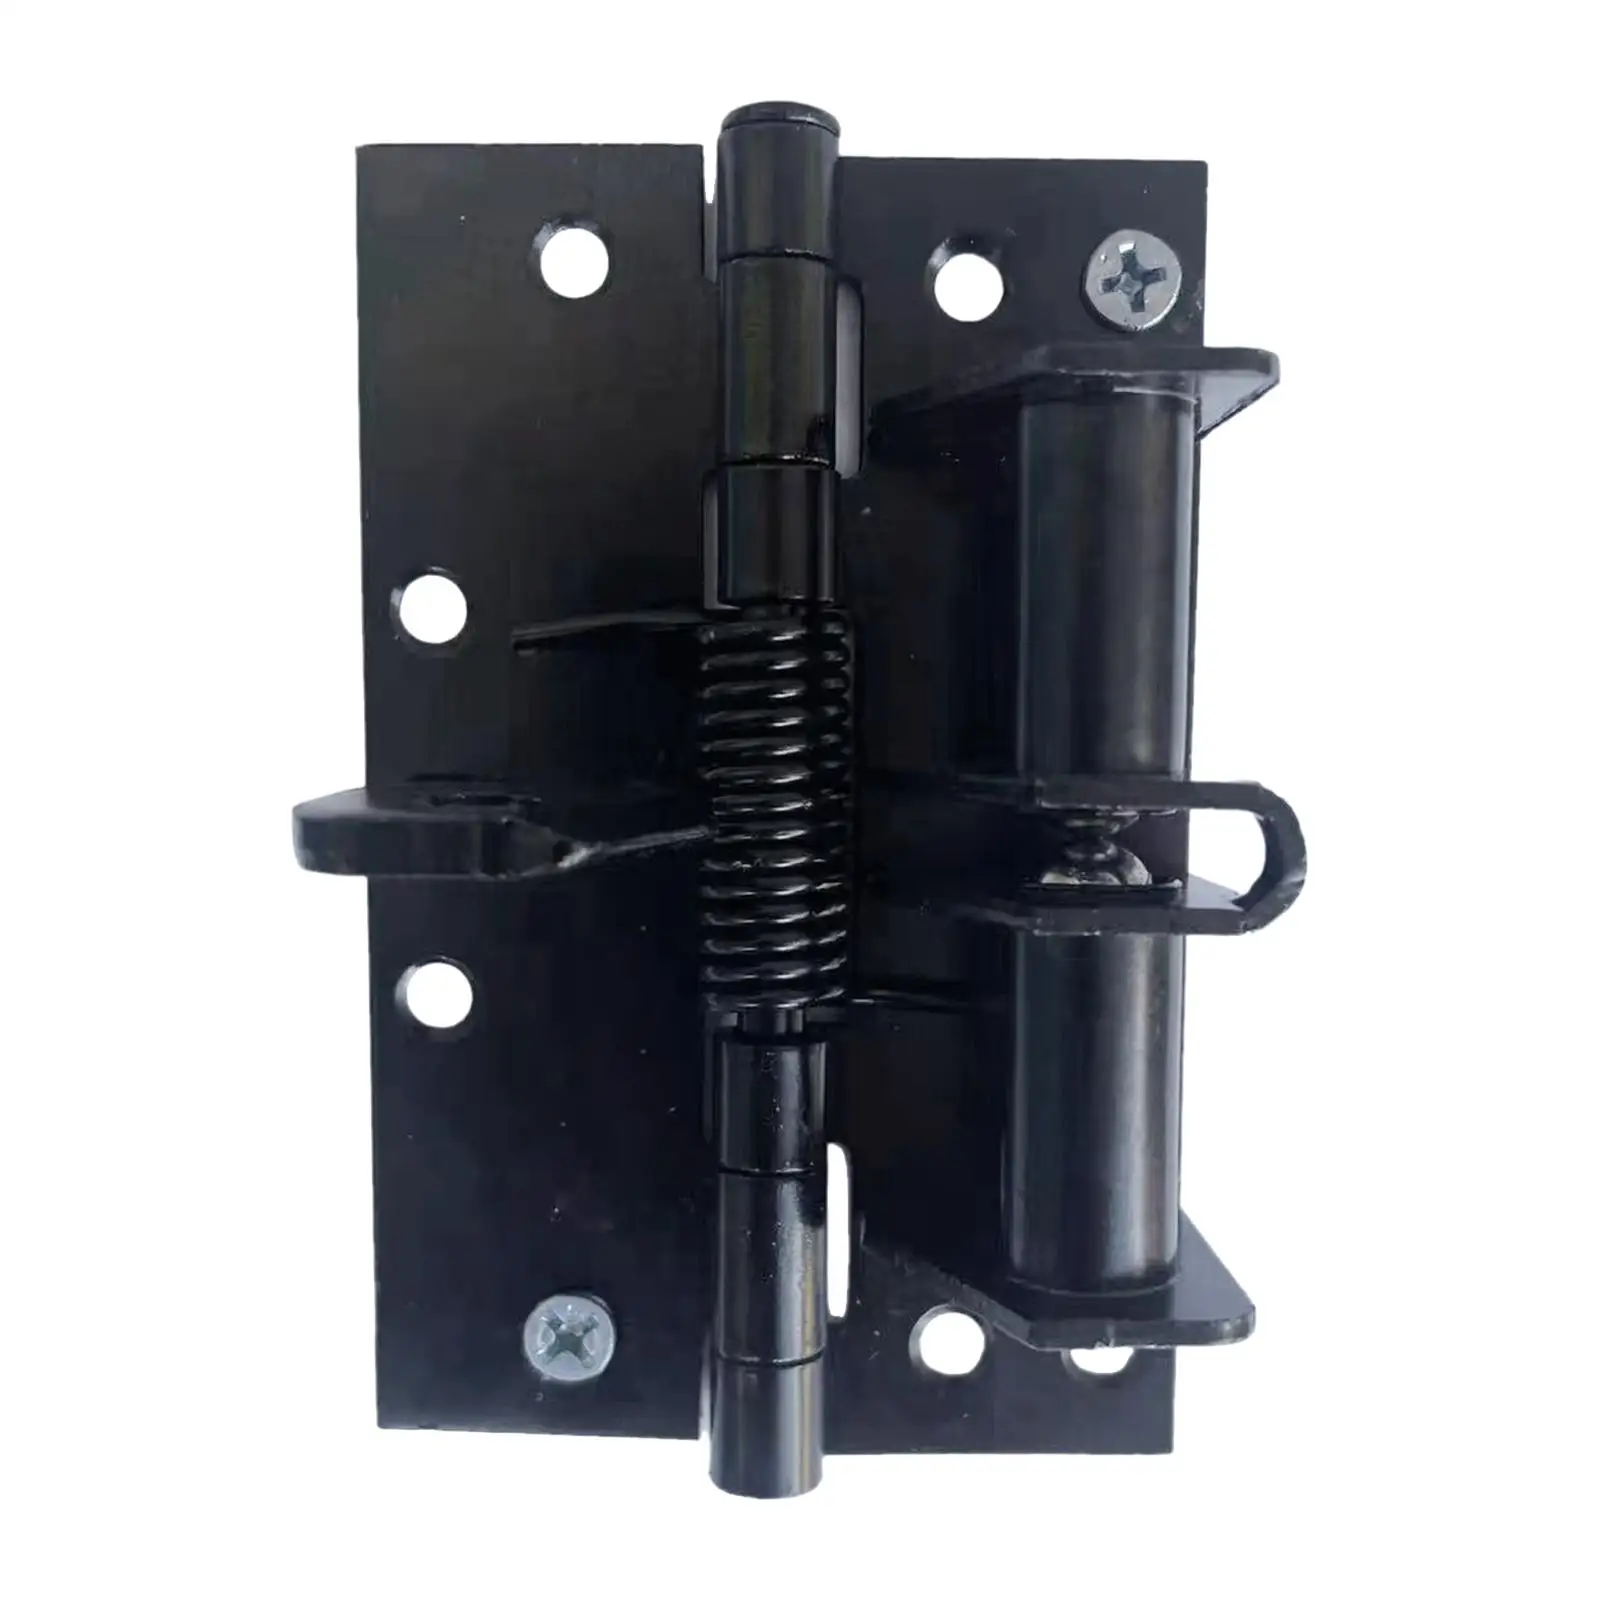 Spring Loaded Hinges Auto Closing with Installation Screw Closer for Drawer